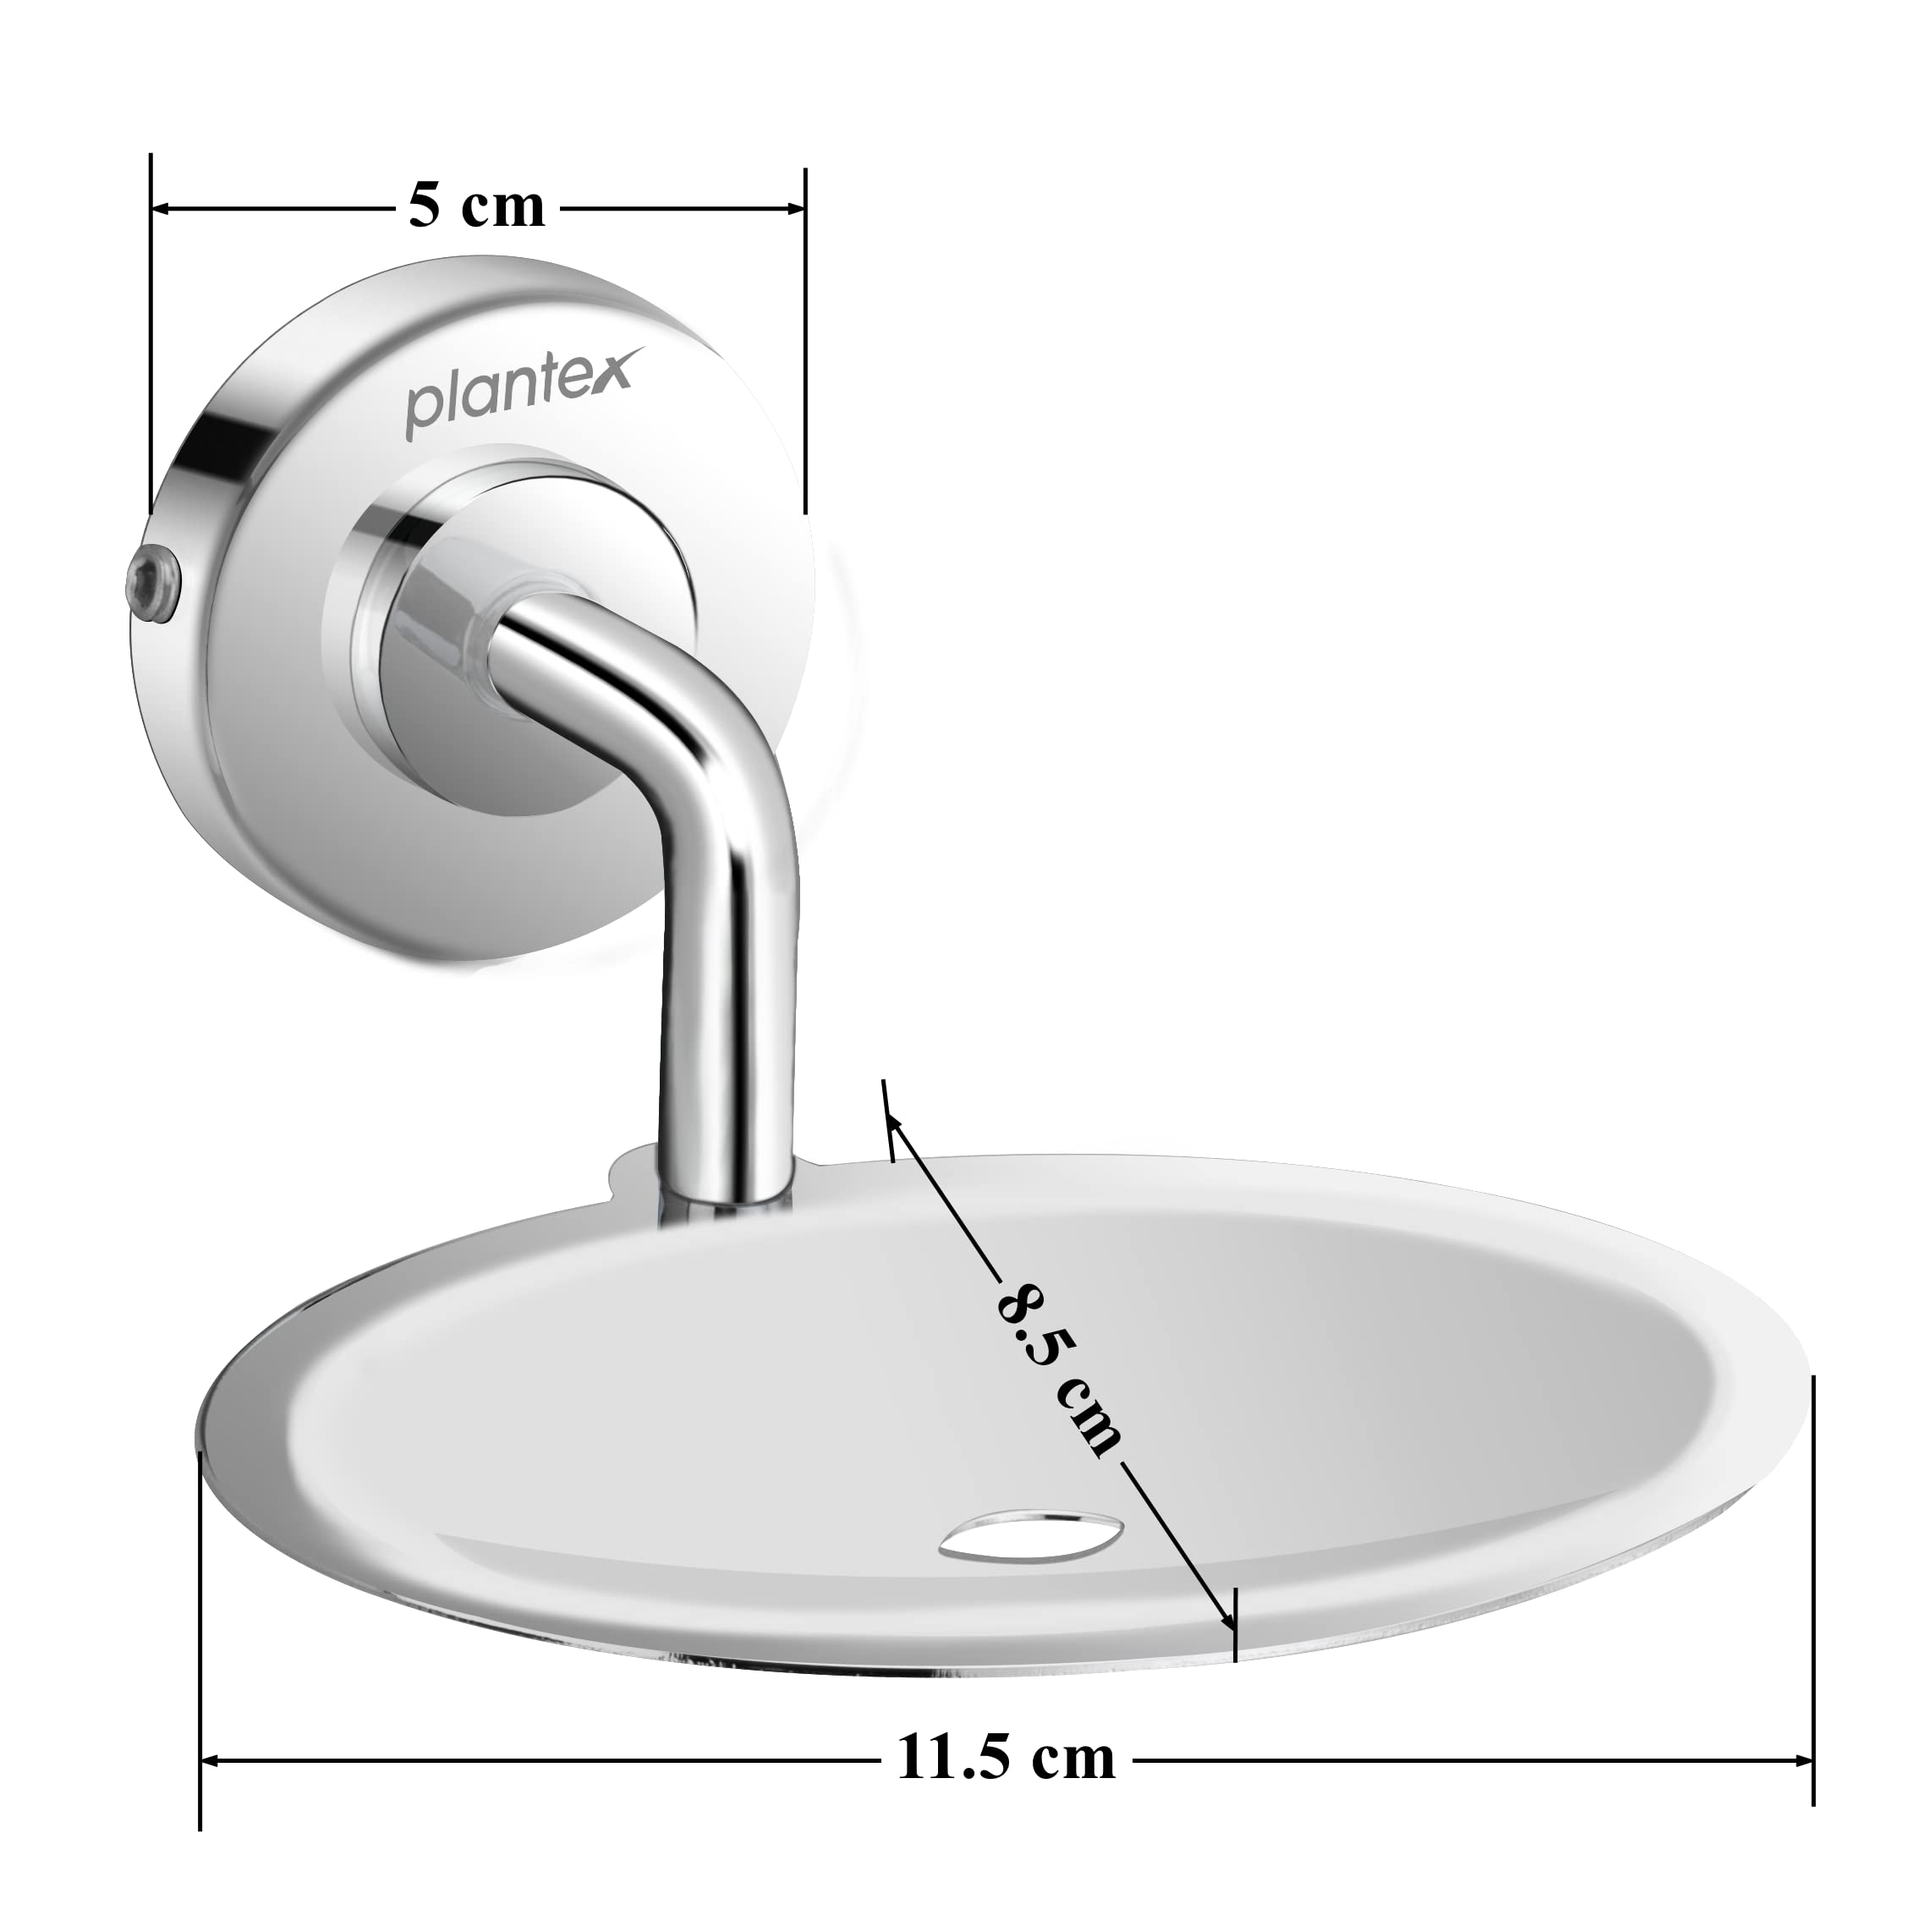 Plantex Daizy soap Holder Stand for Bathroom and wash Basin (304 Stainless Steel)